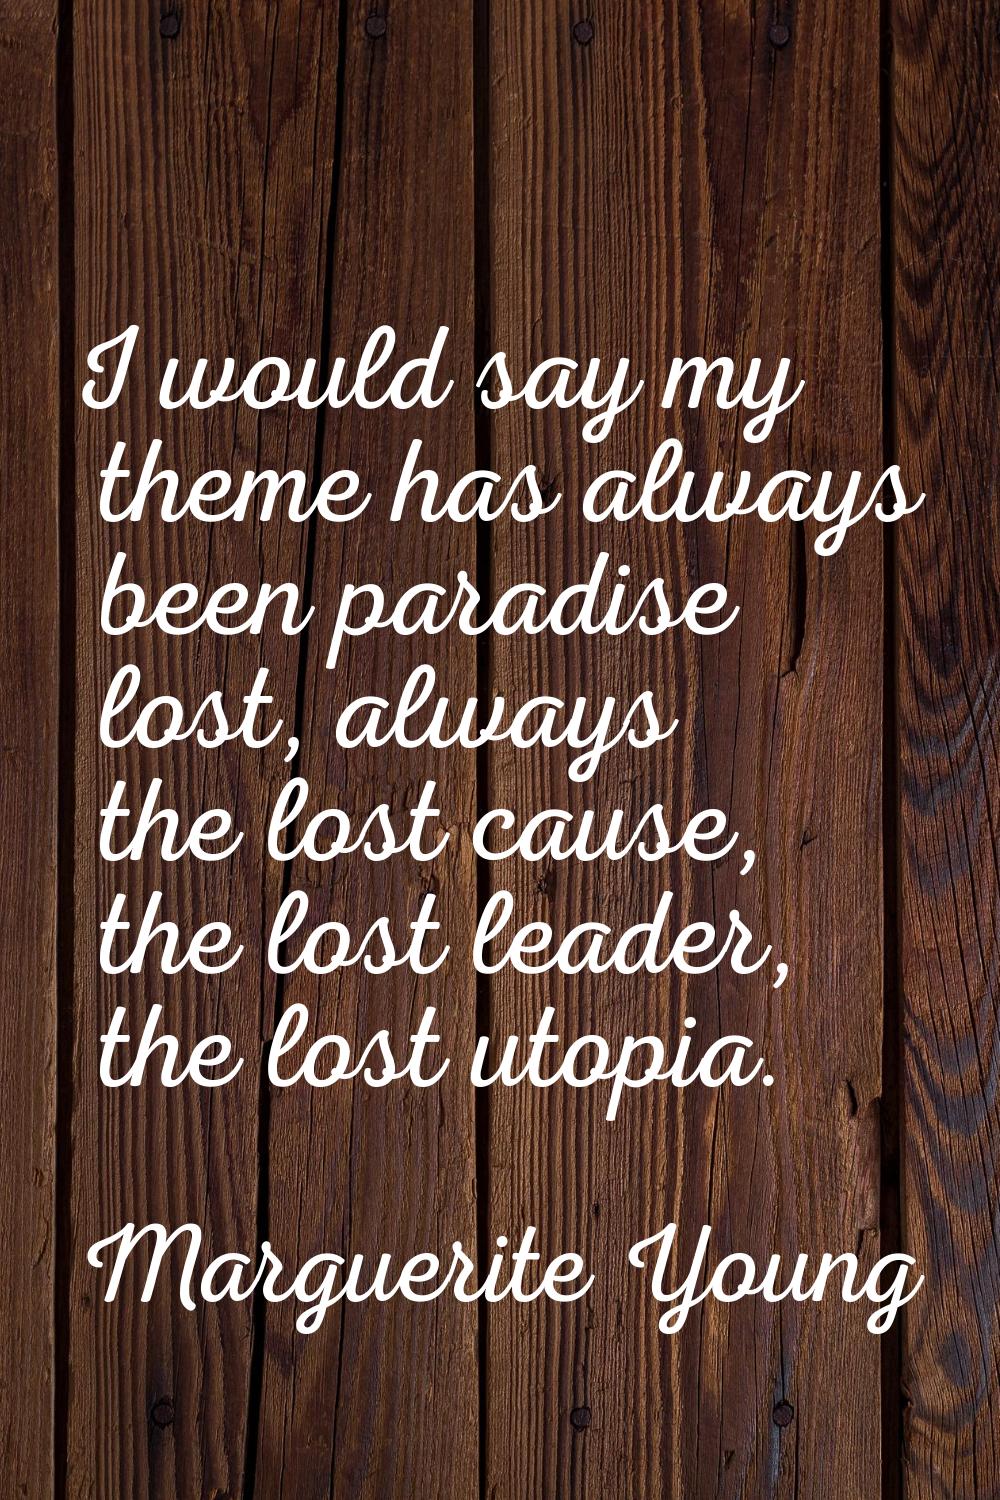 I would say my theme has always been paradise lost, always the lost cause, the lost leader, the los